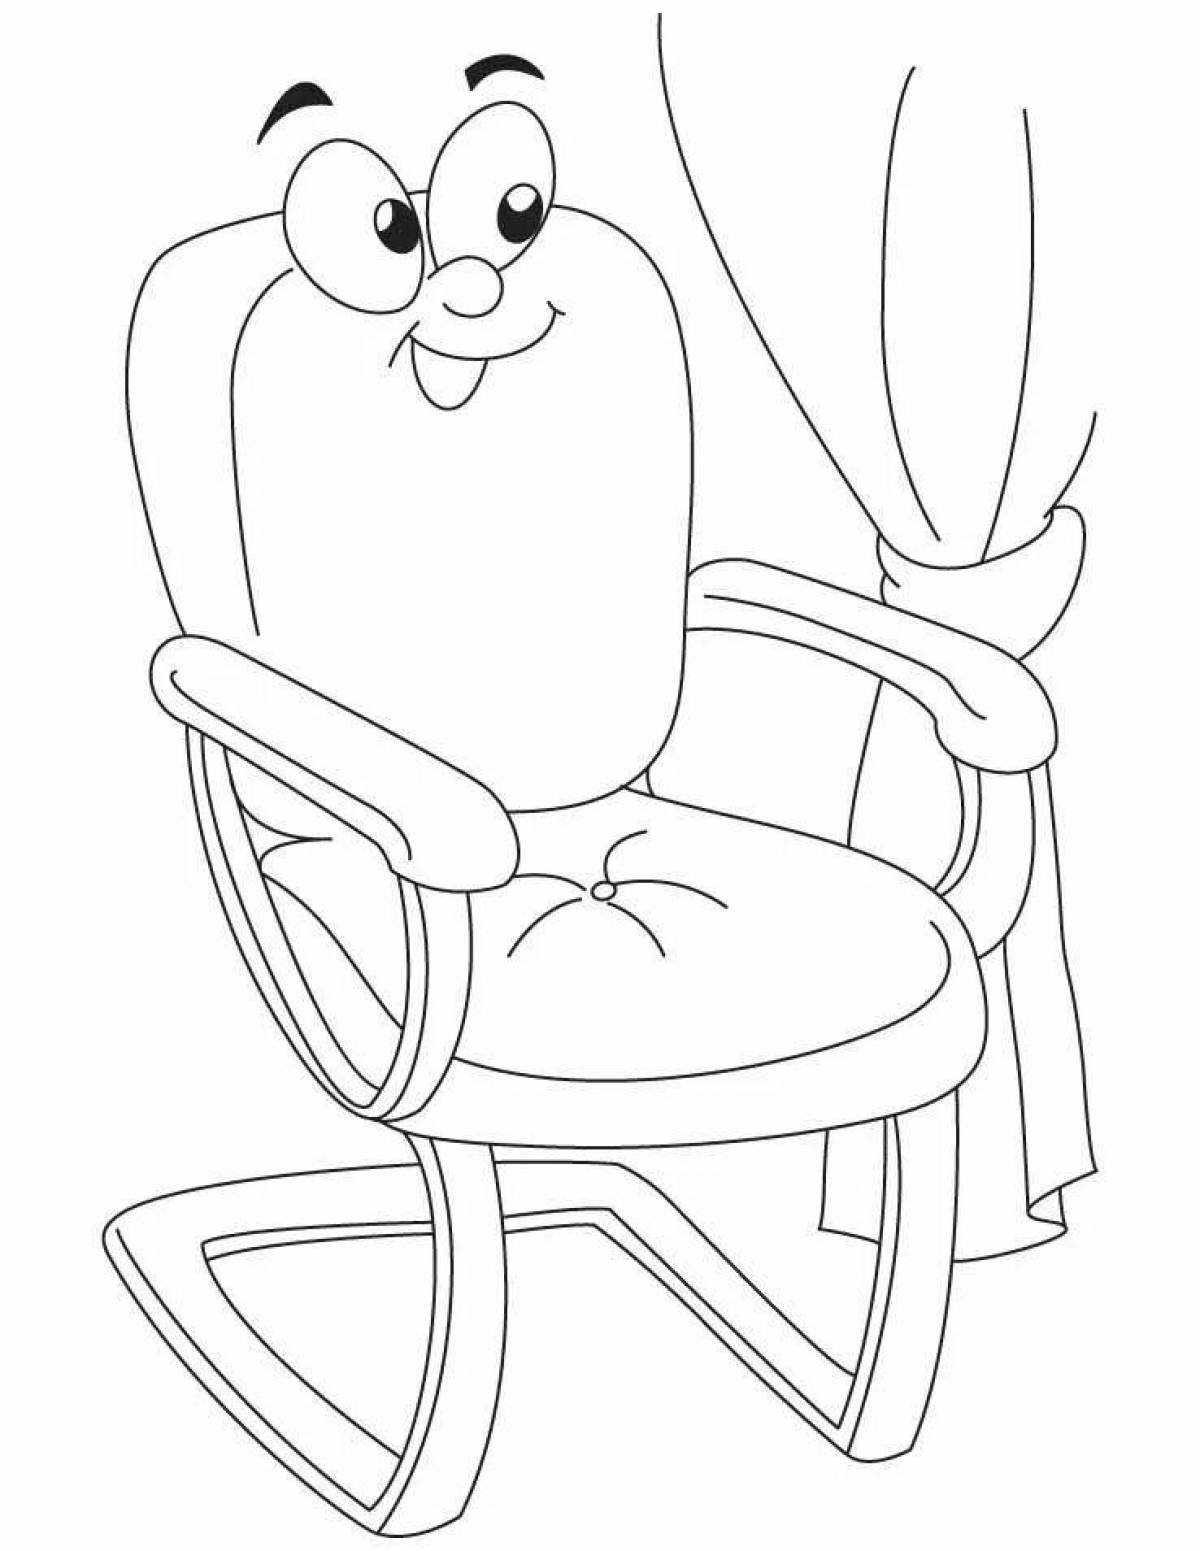 Fairy chair coloring page